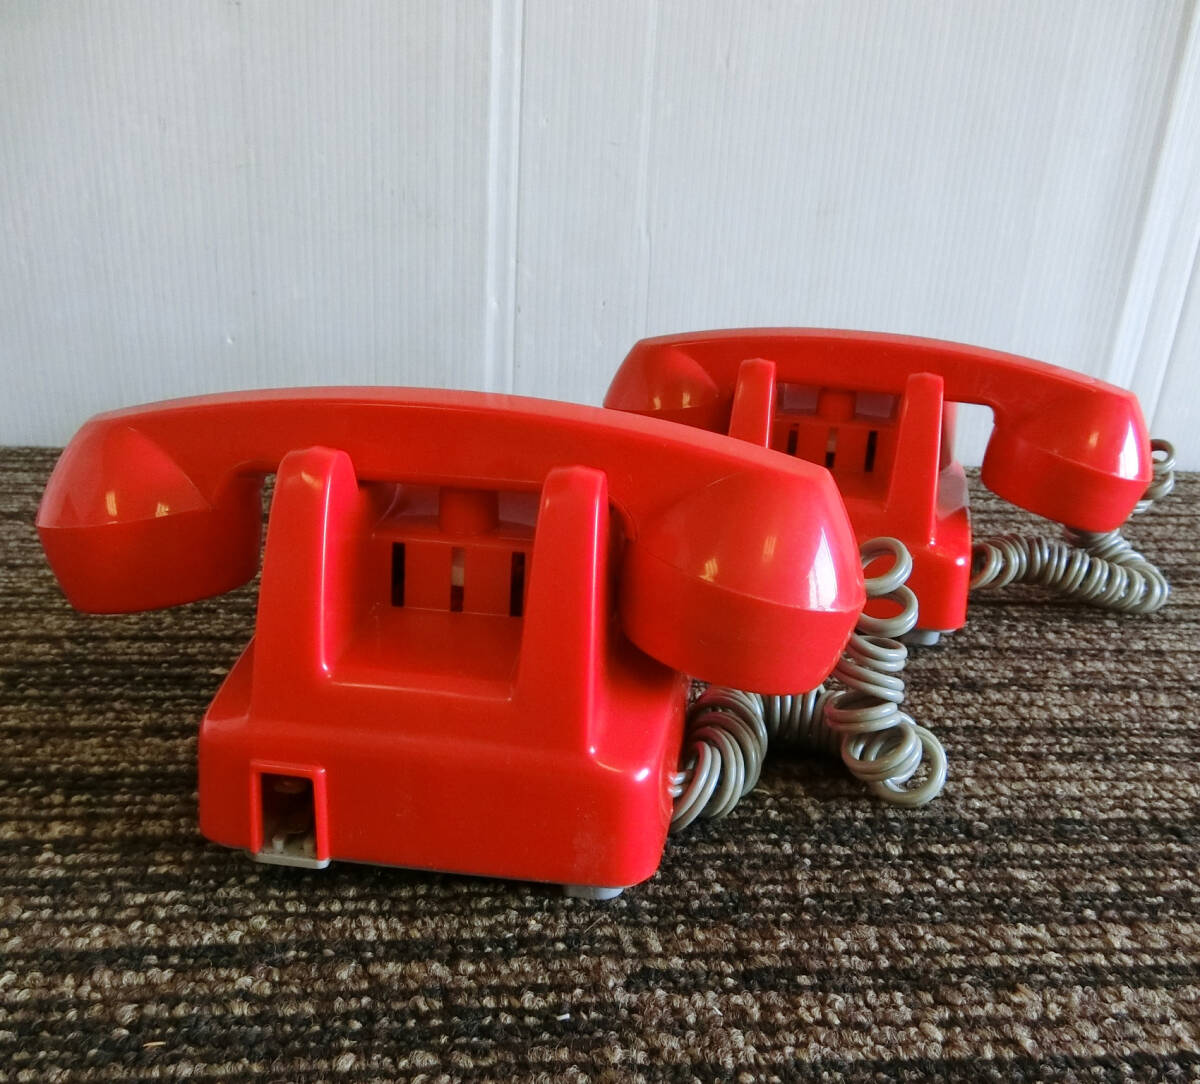 * Showa Retro new bell horn dial type telephone machine red 2 pcs go in KGK Kanto compound industry NEW BELPHONE Vintage 